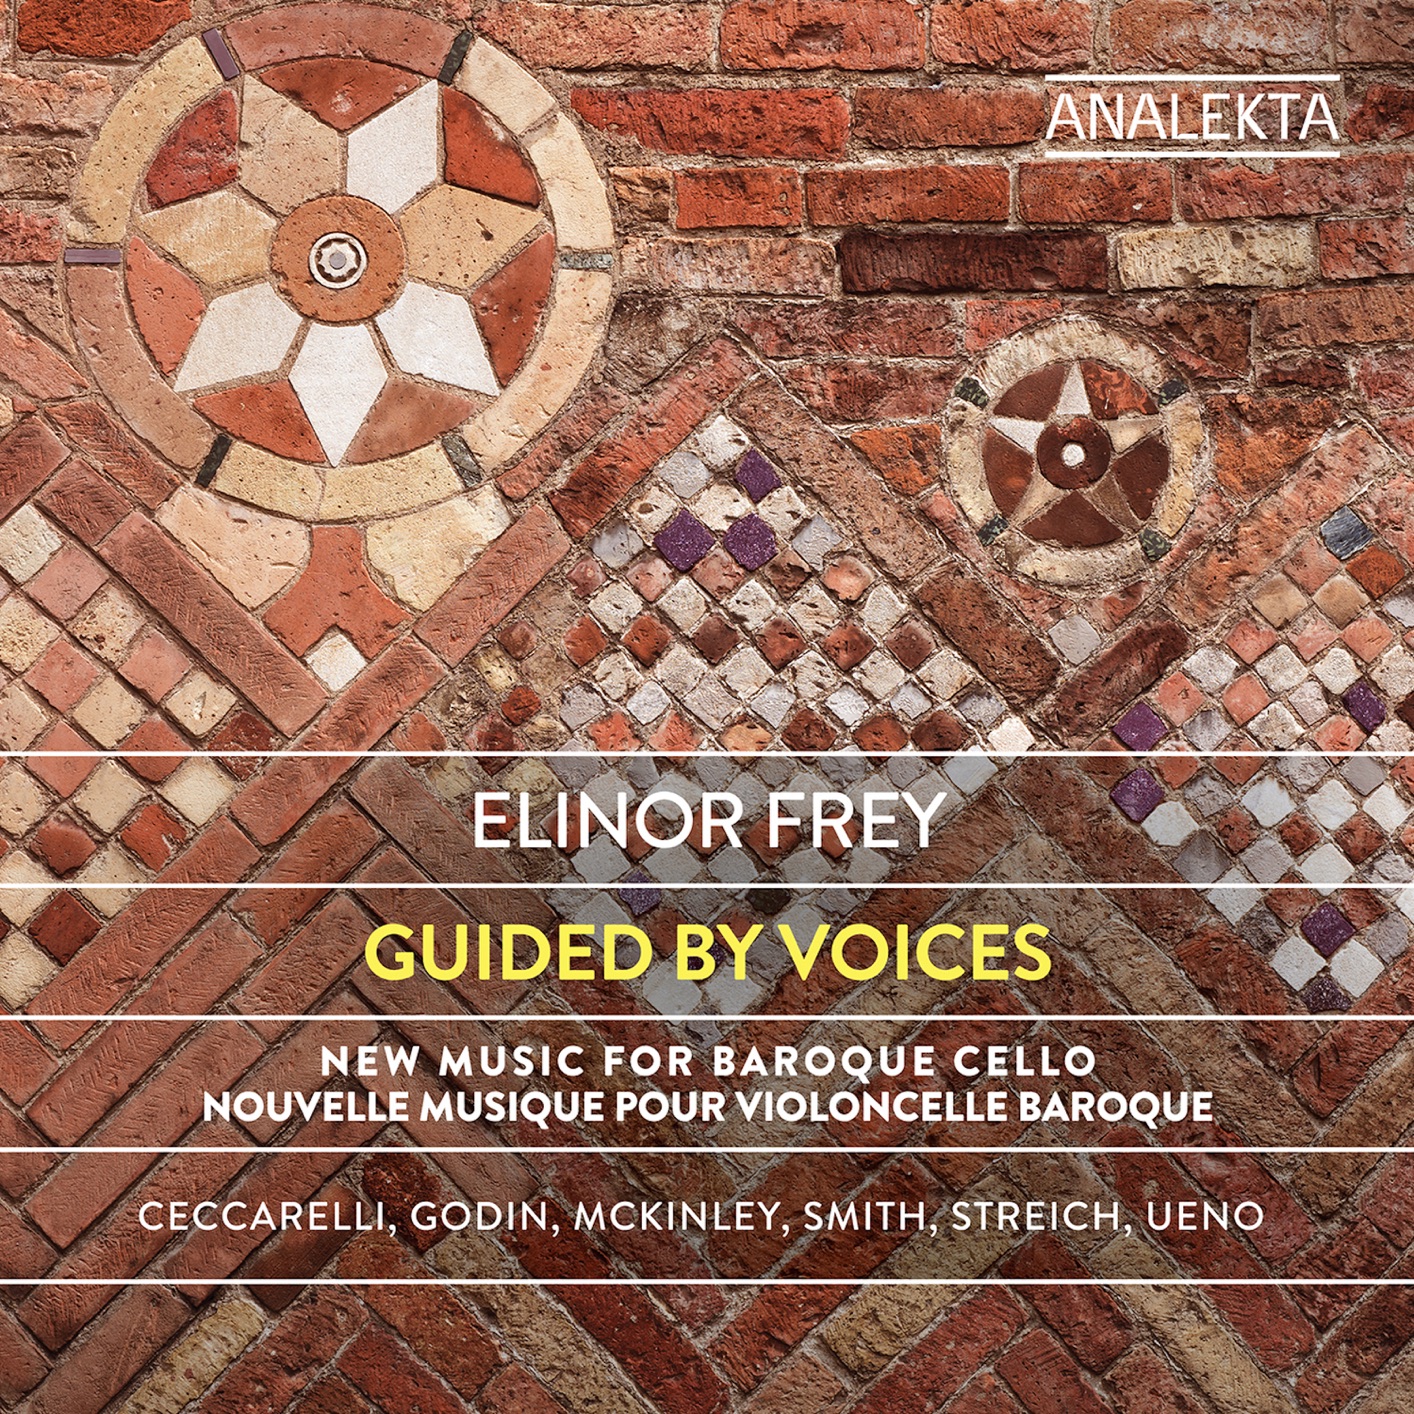 Elinor Frey - Guided by Voices: New Music for Baroque Cello (2019) [FLAC 24bit/88,2kHz]